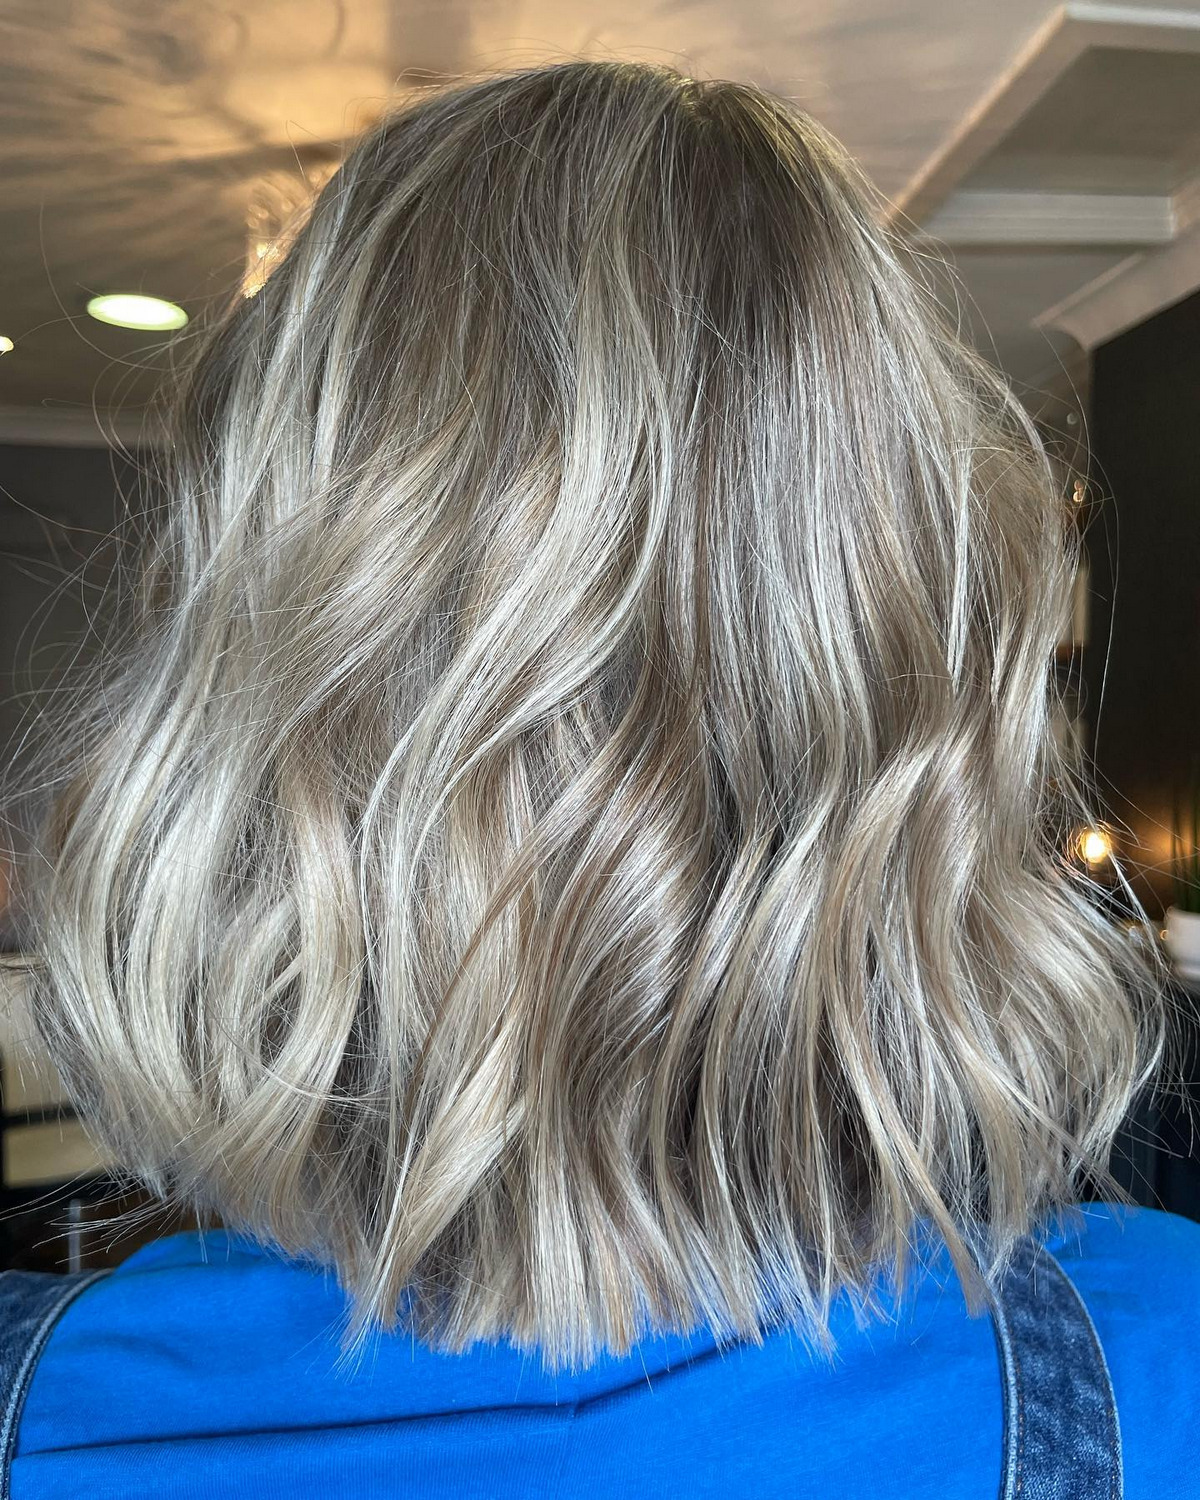 Blonde Bob With Textured Layers And Highlights